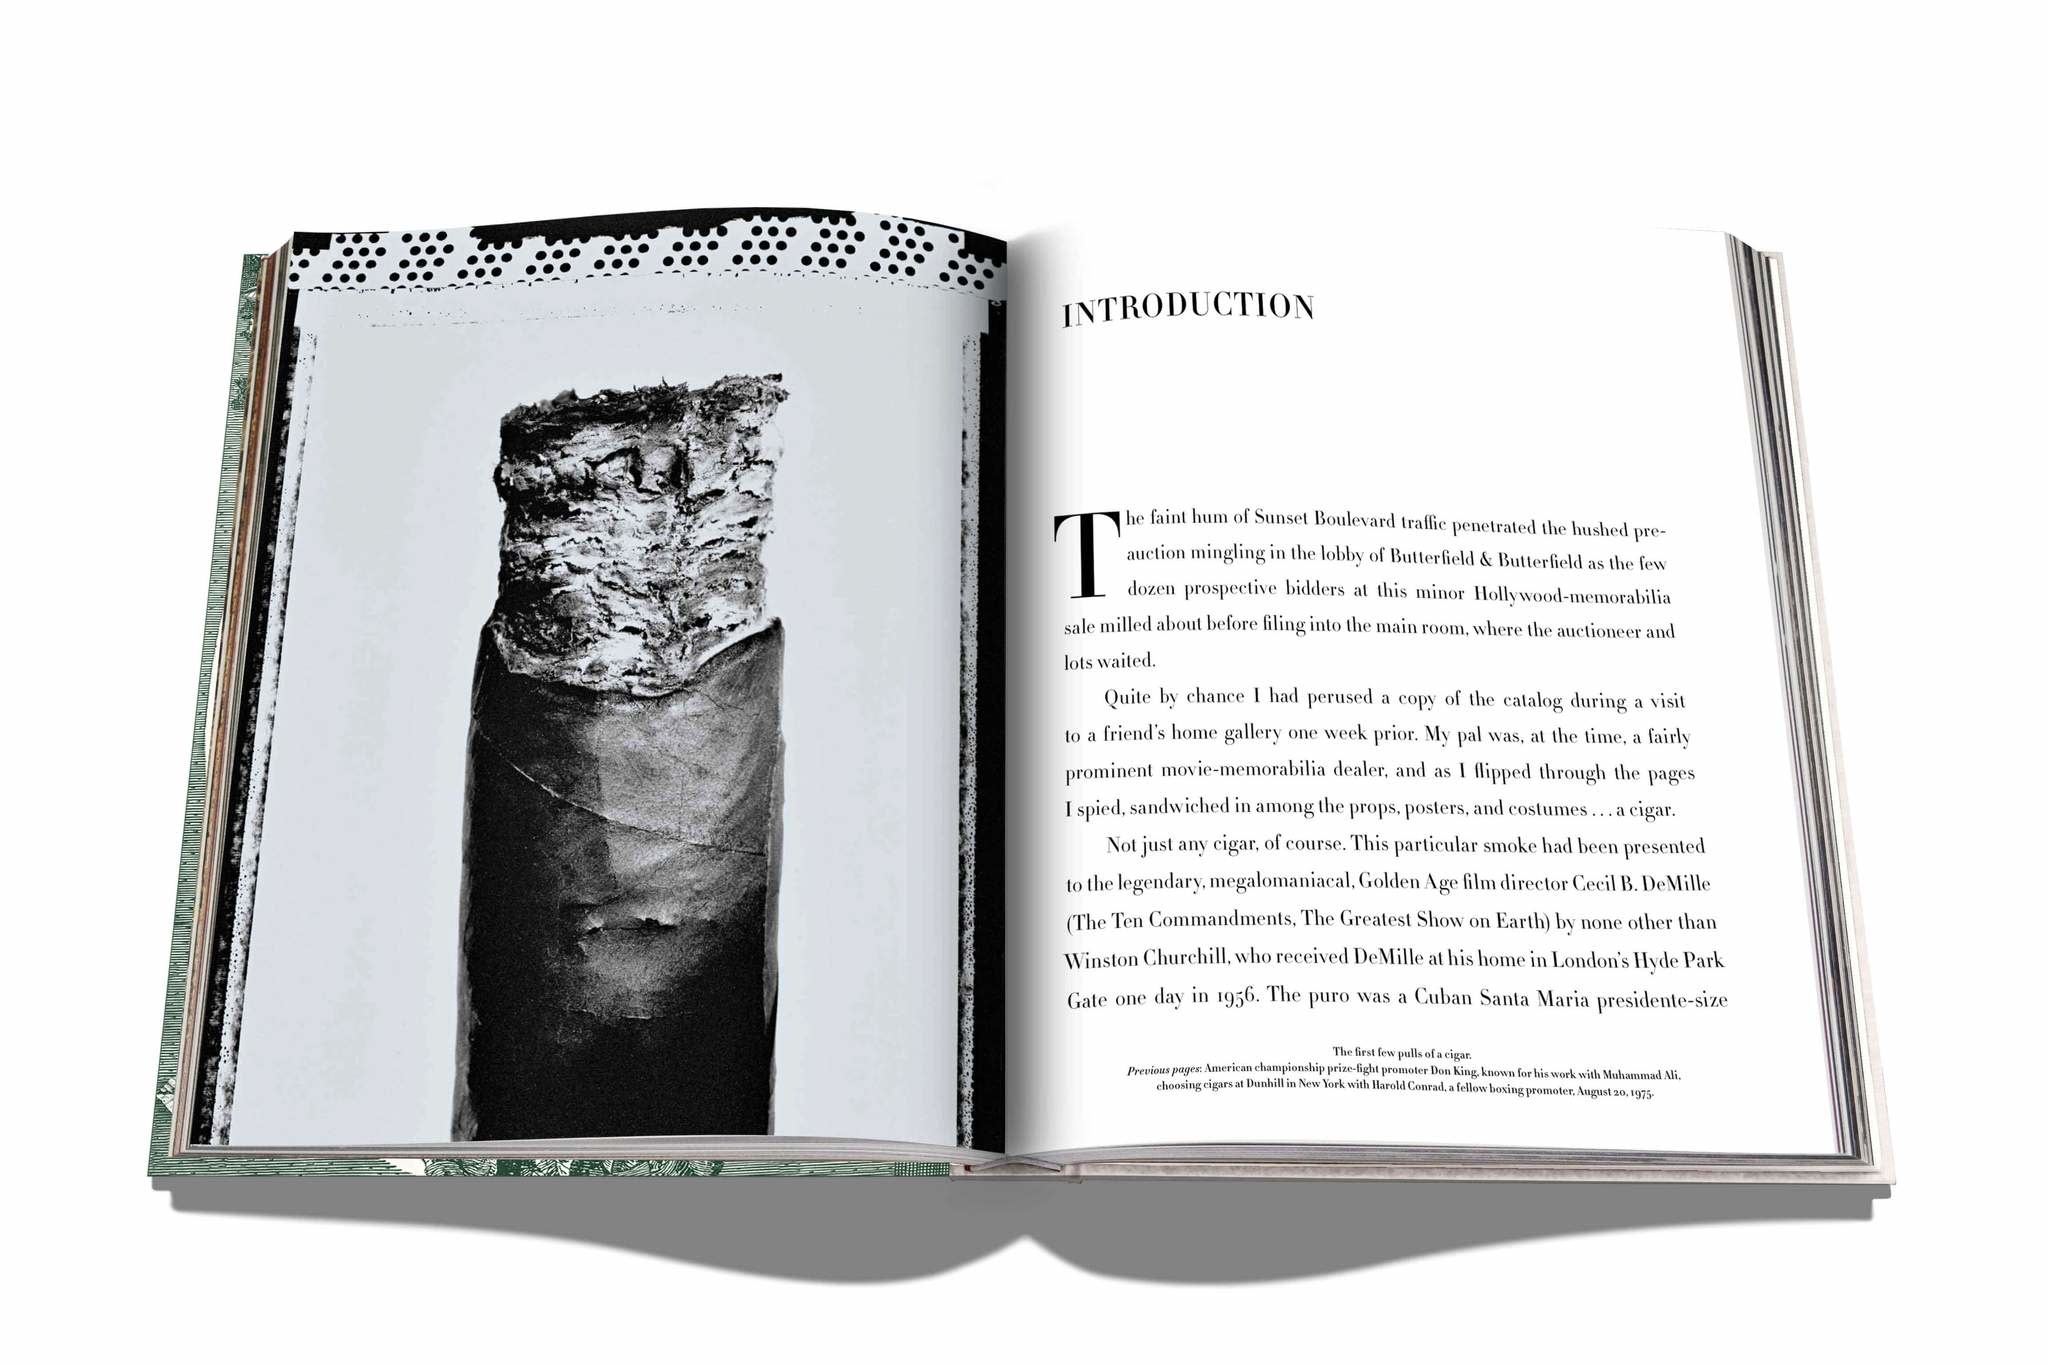 Book The Impossible Collection of Cigars-5